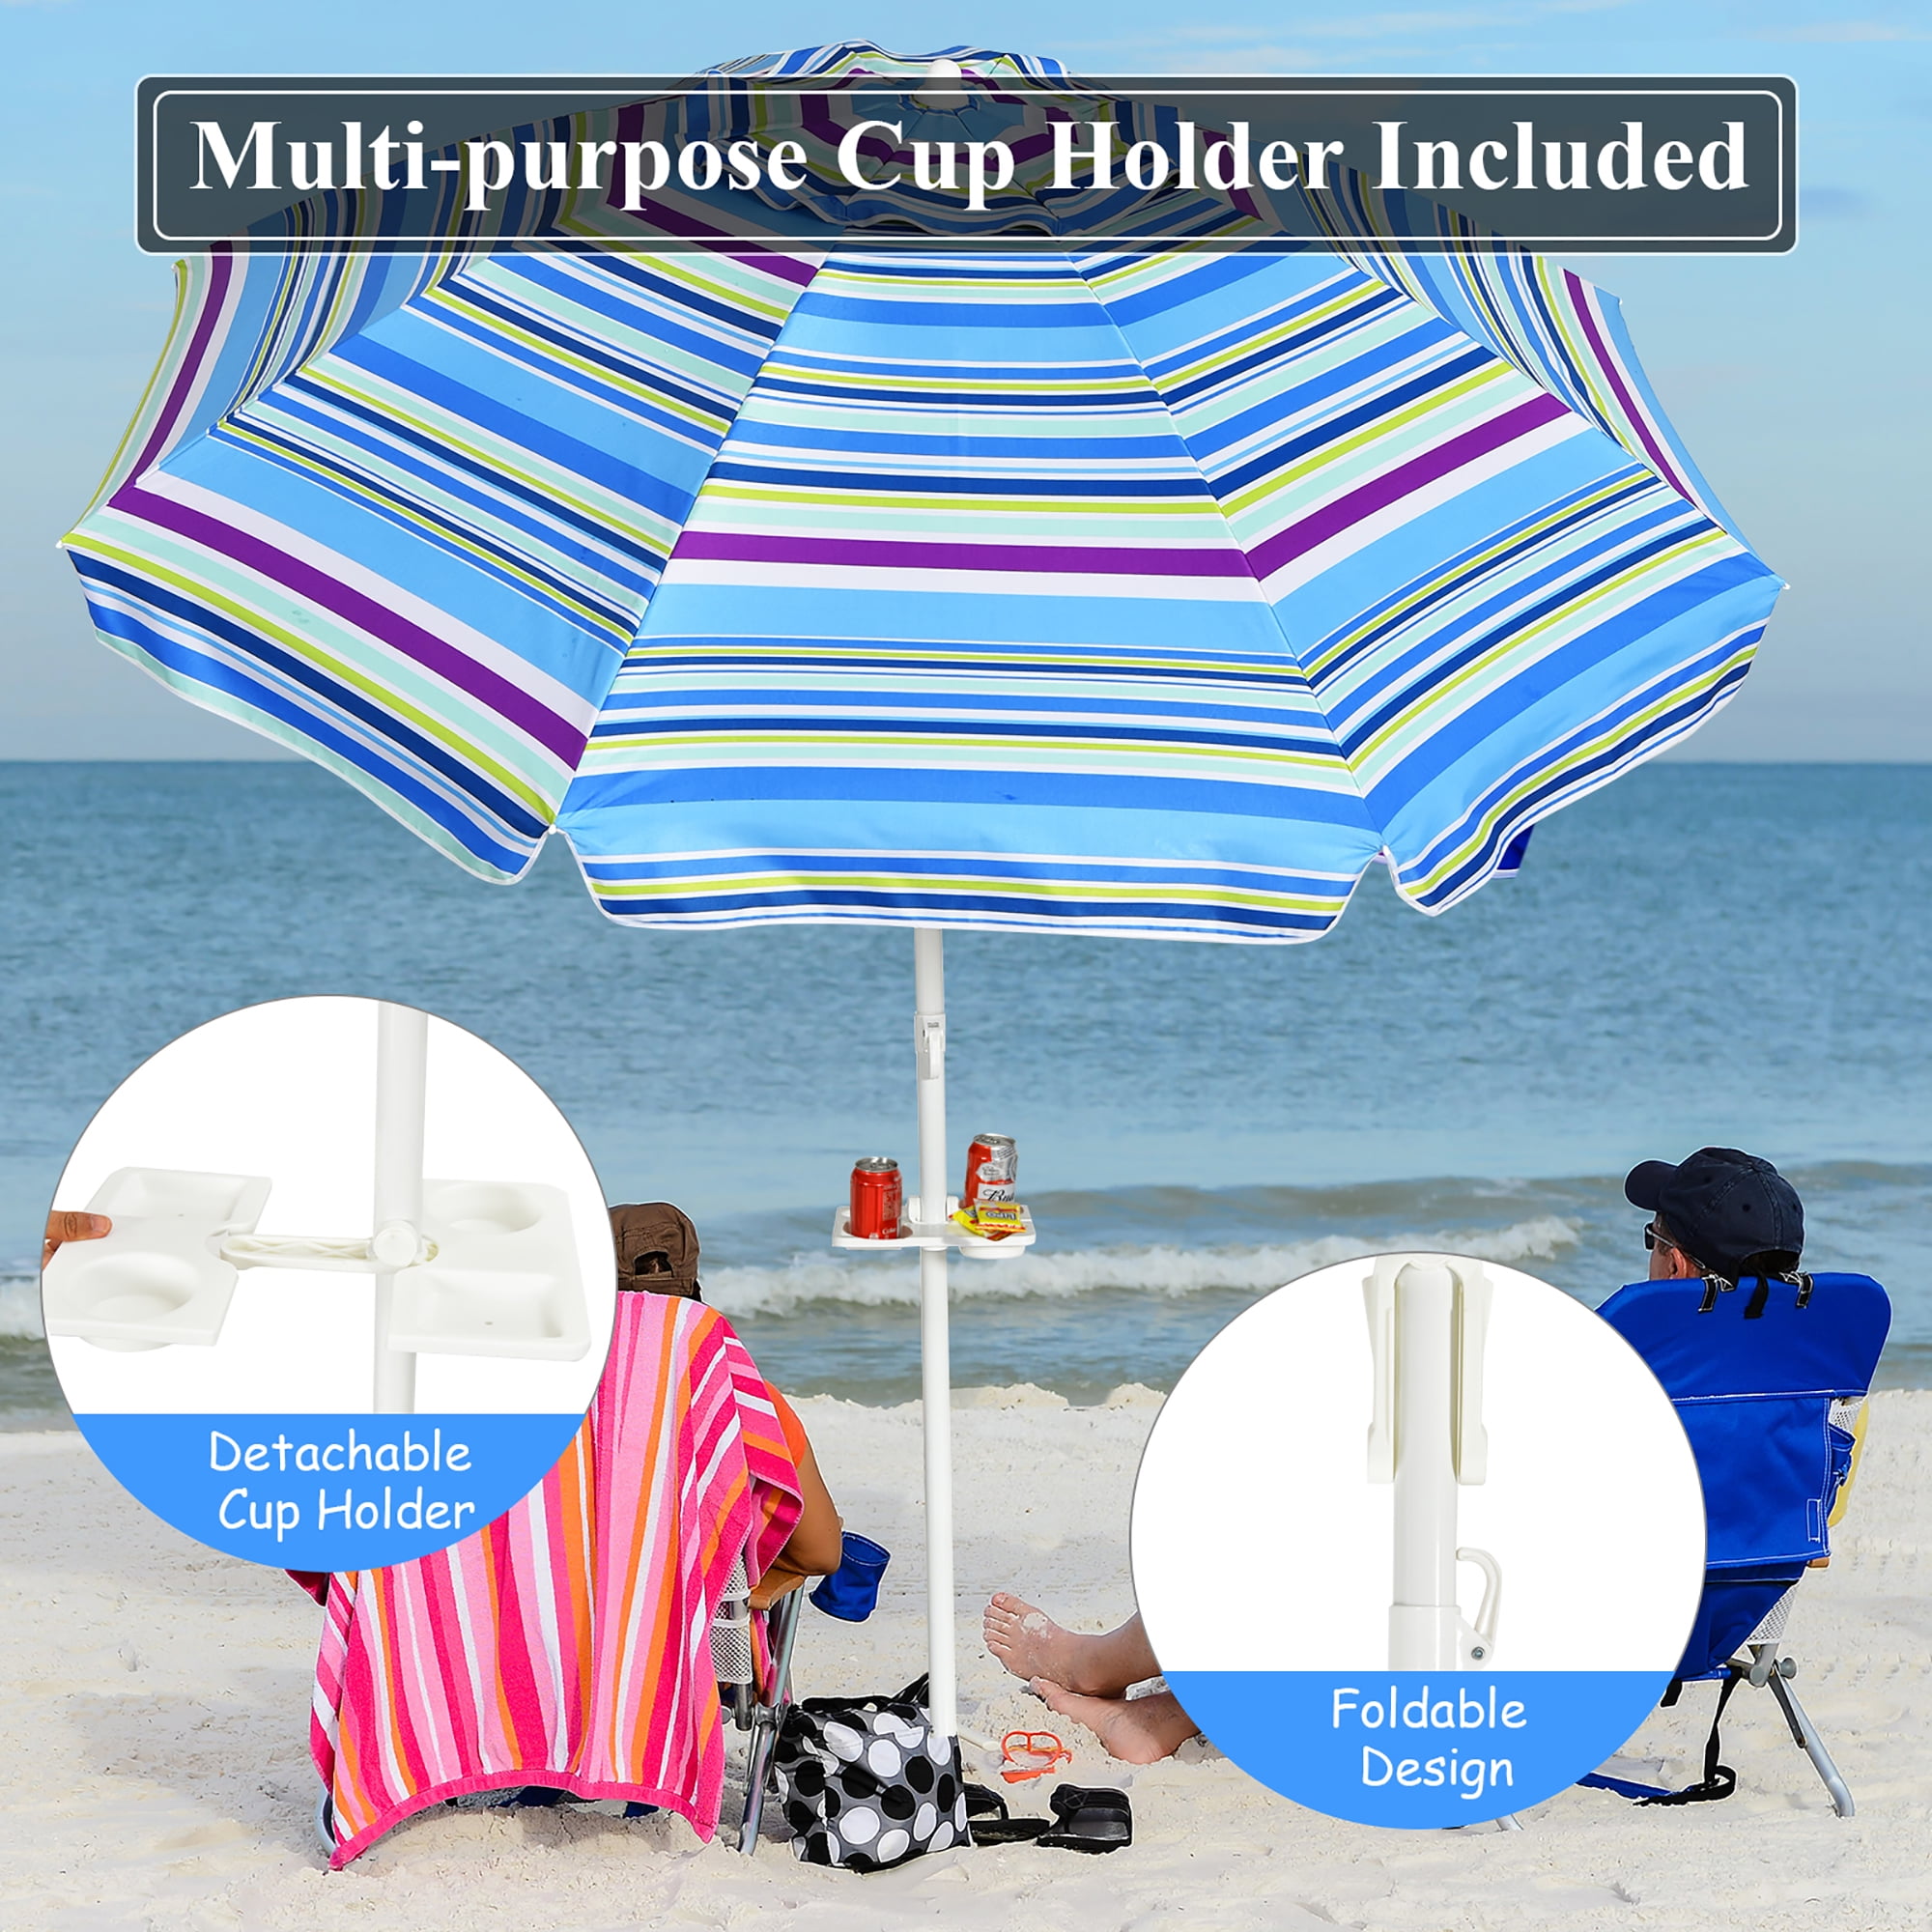 Umbrella Holds Your Cups For You